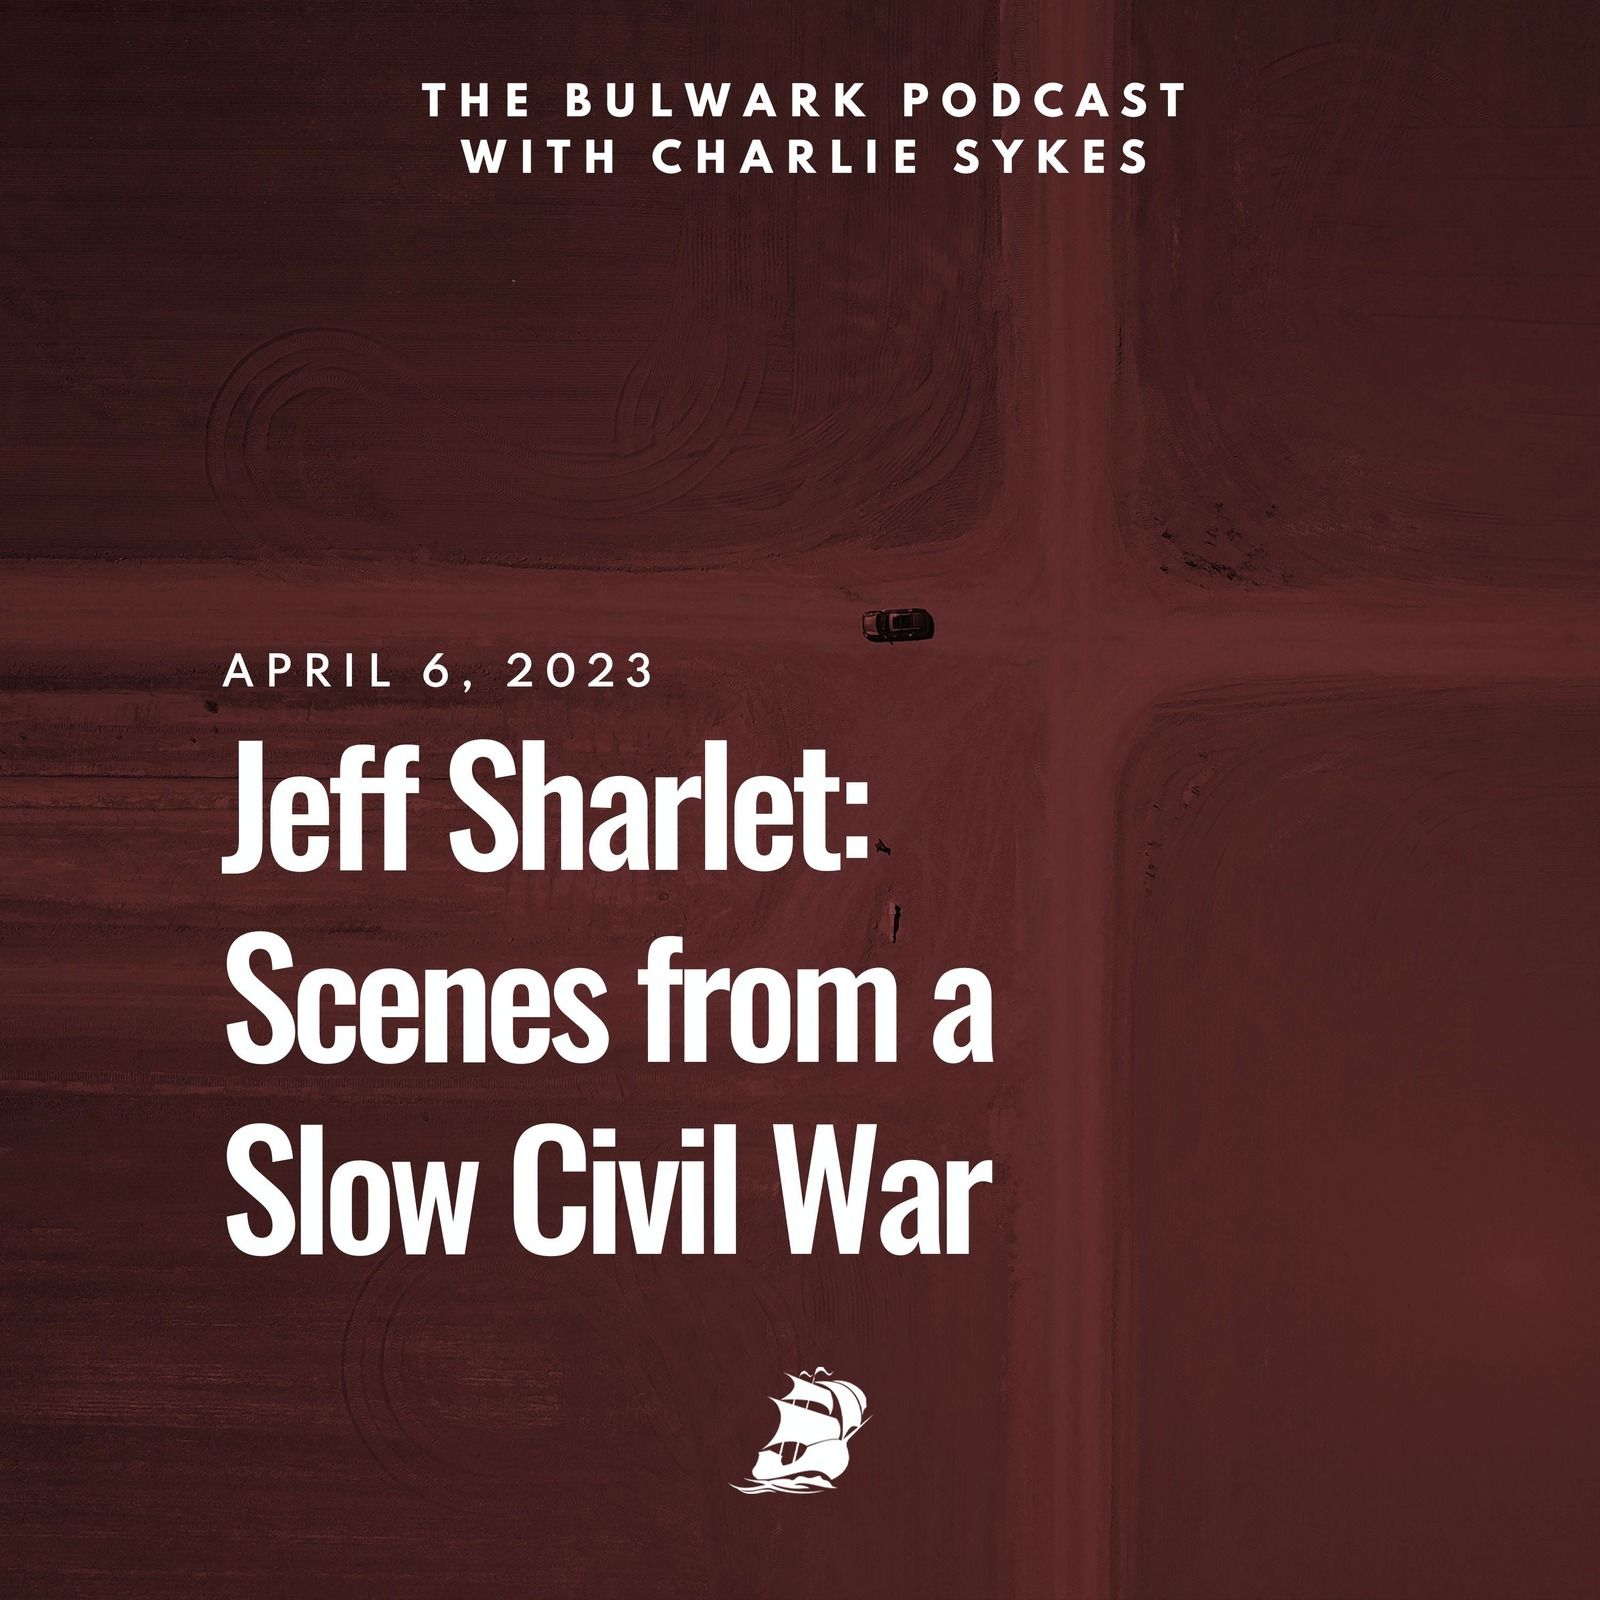 Jeff Sharlet: Scenes from a Slow Civil War